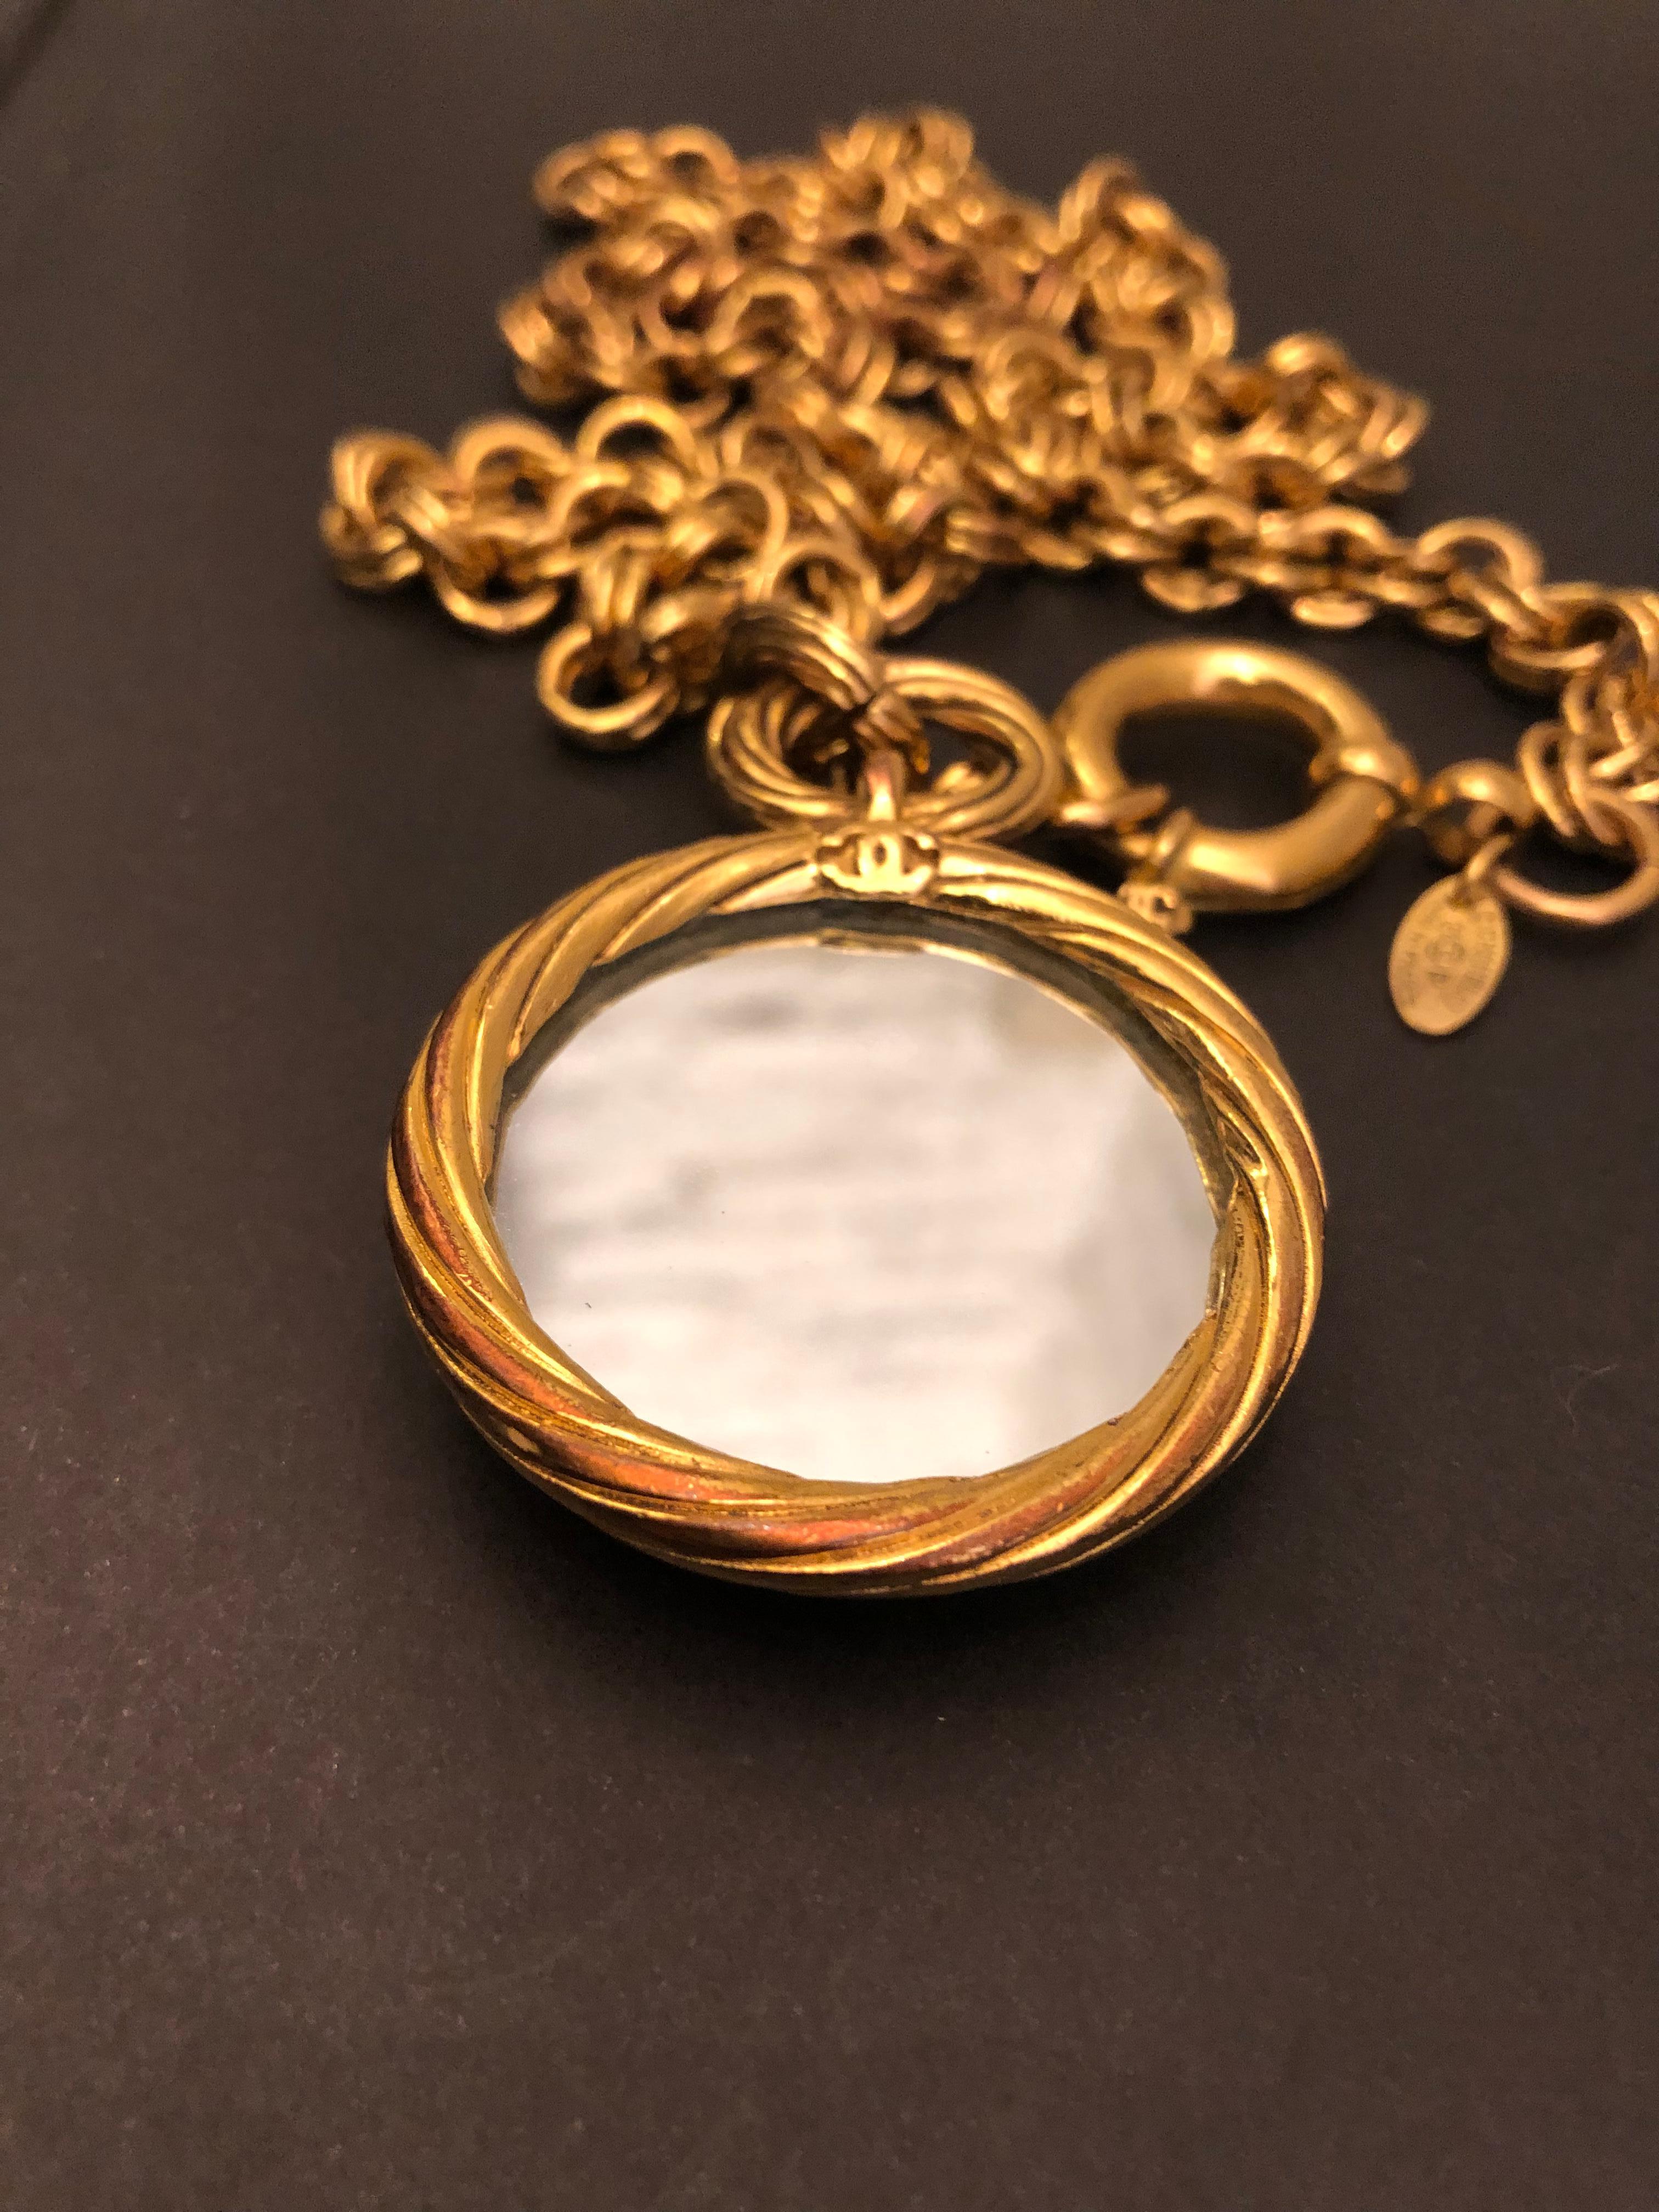 1993 Vintage CHANEL Gold Toned Chain Mirror Necklace For Sale 2